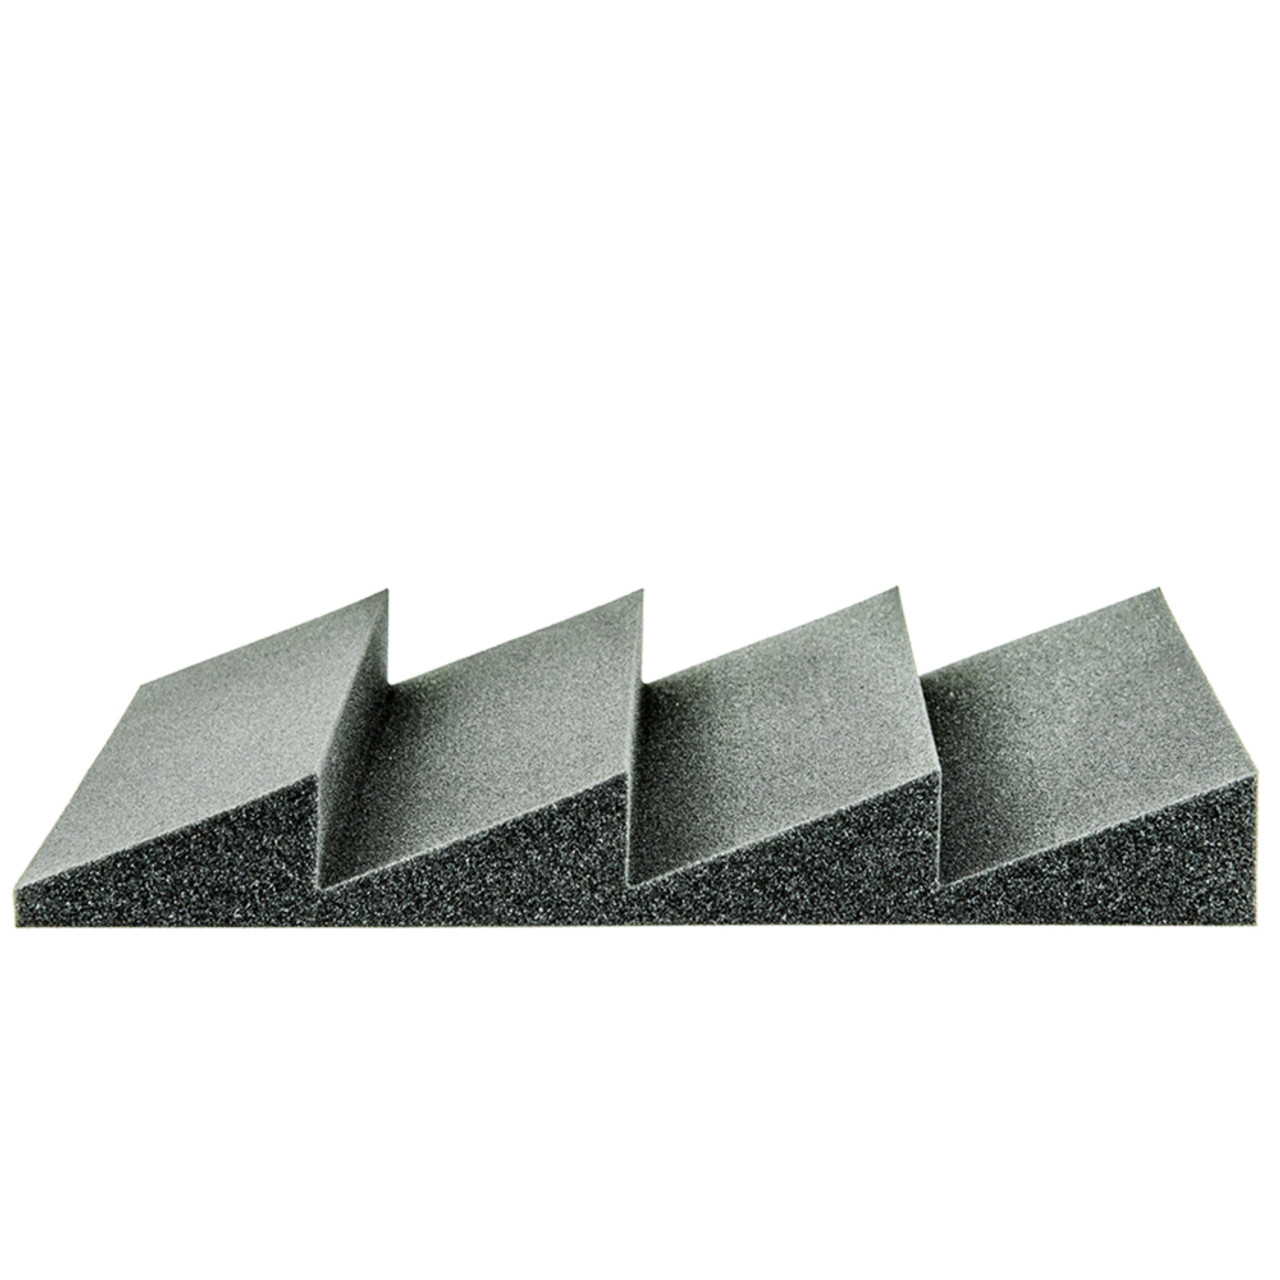 AVE ISOWedge 40 x 40cm Sawtooth Acoustic Foam (10 Pack)